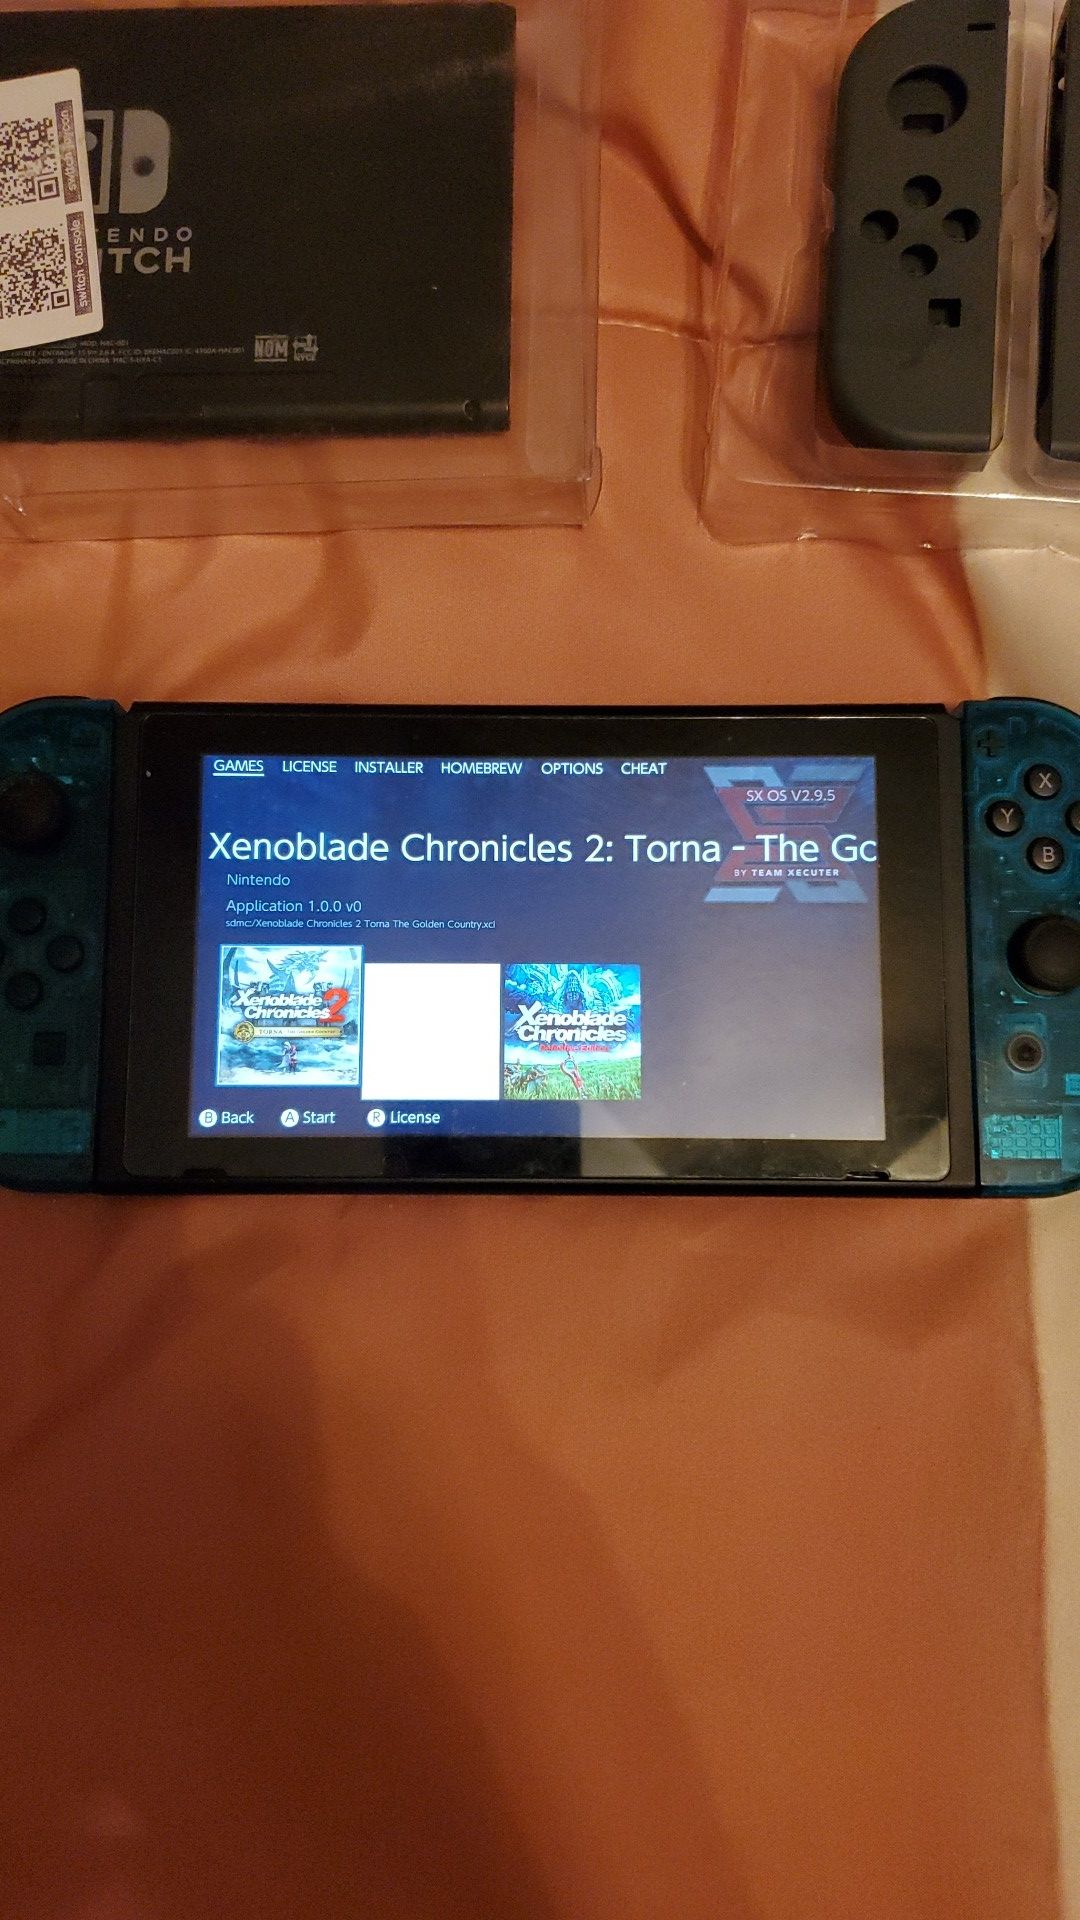 Modded Nintendo Switch + accessories for sale or trade for a ps4 pro